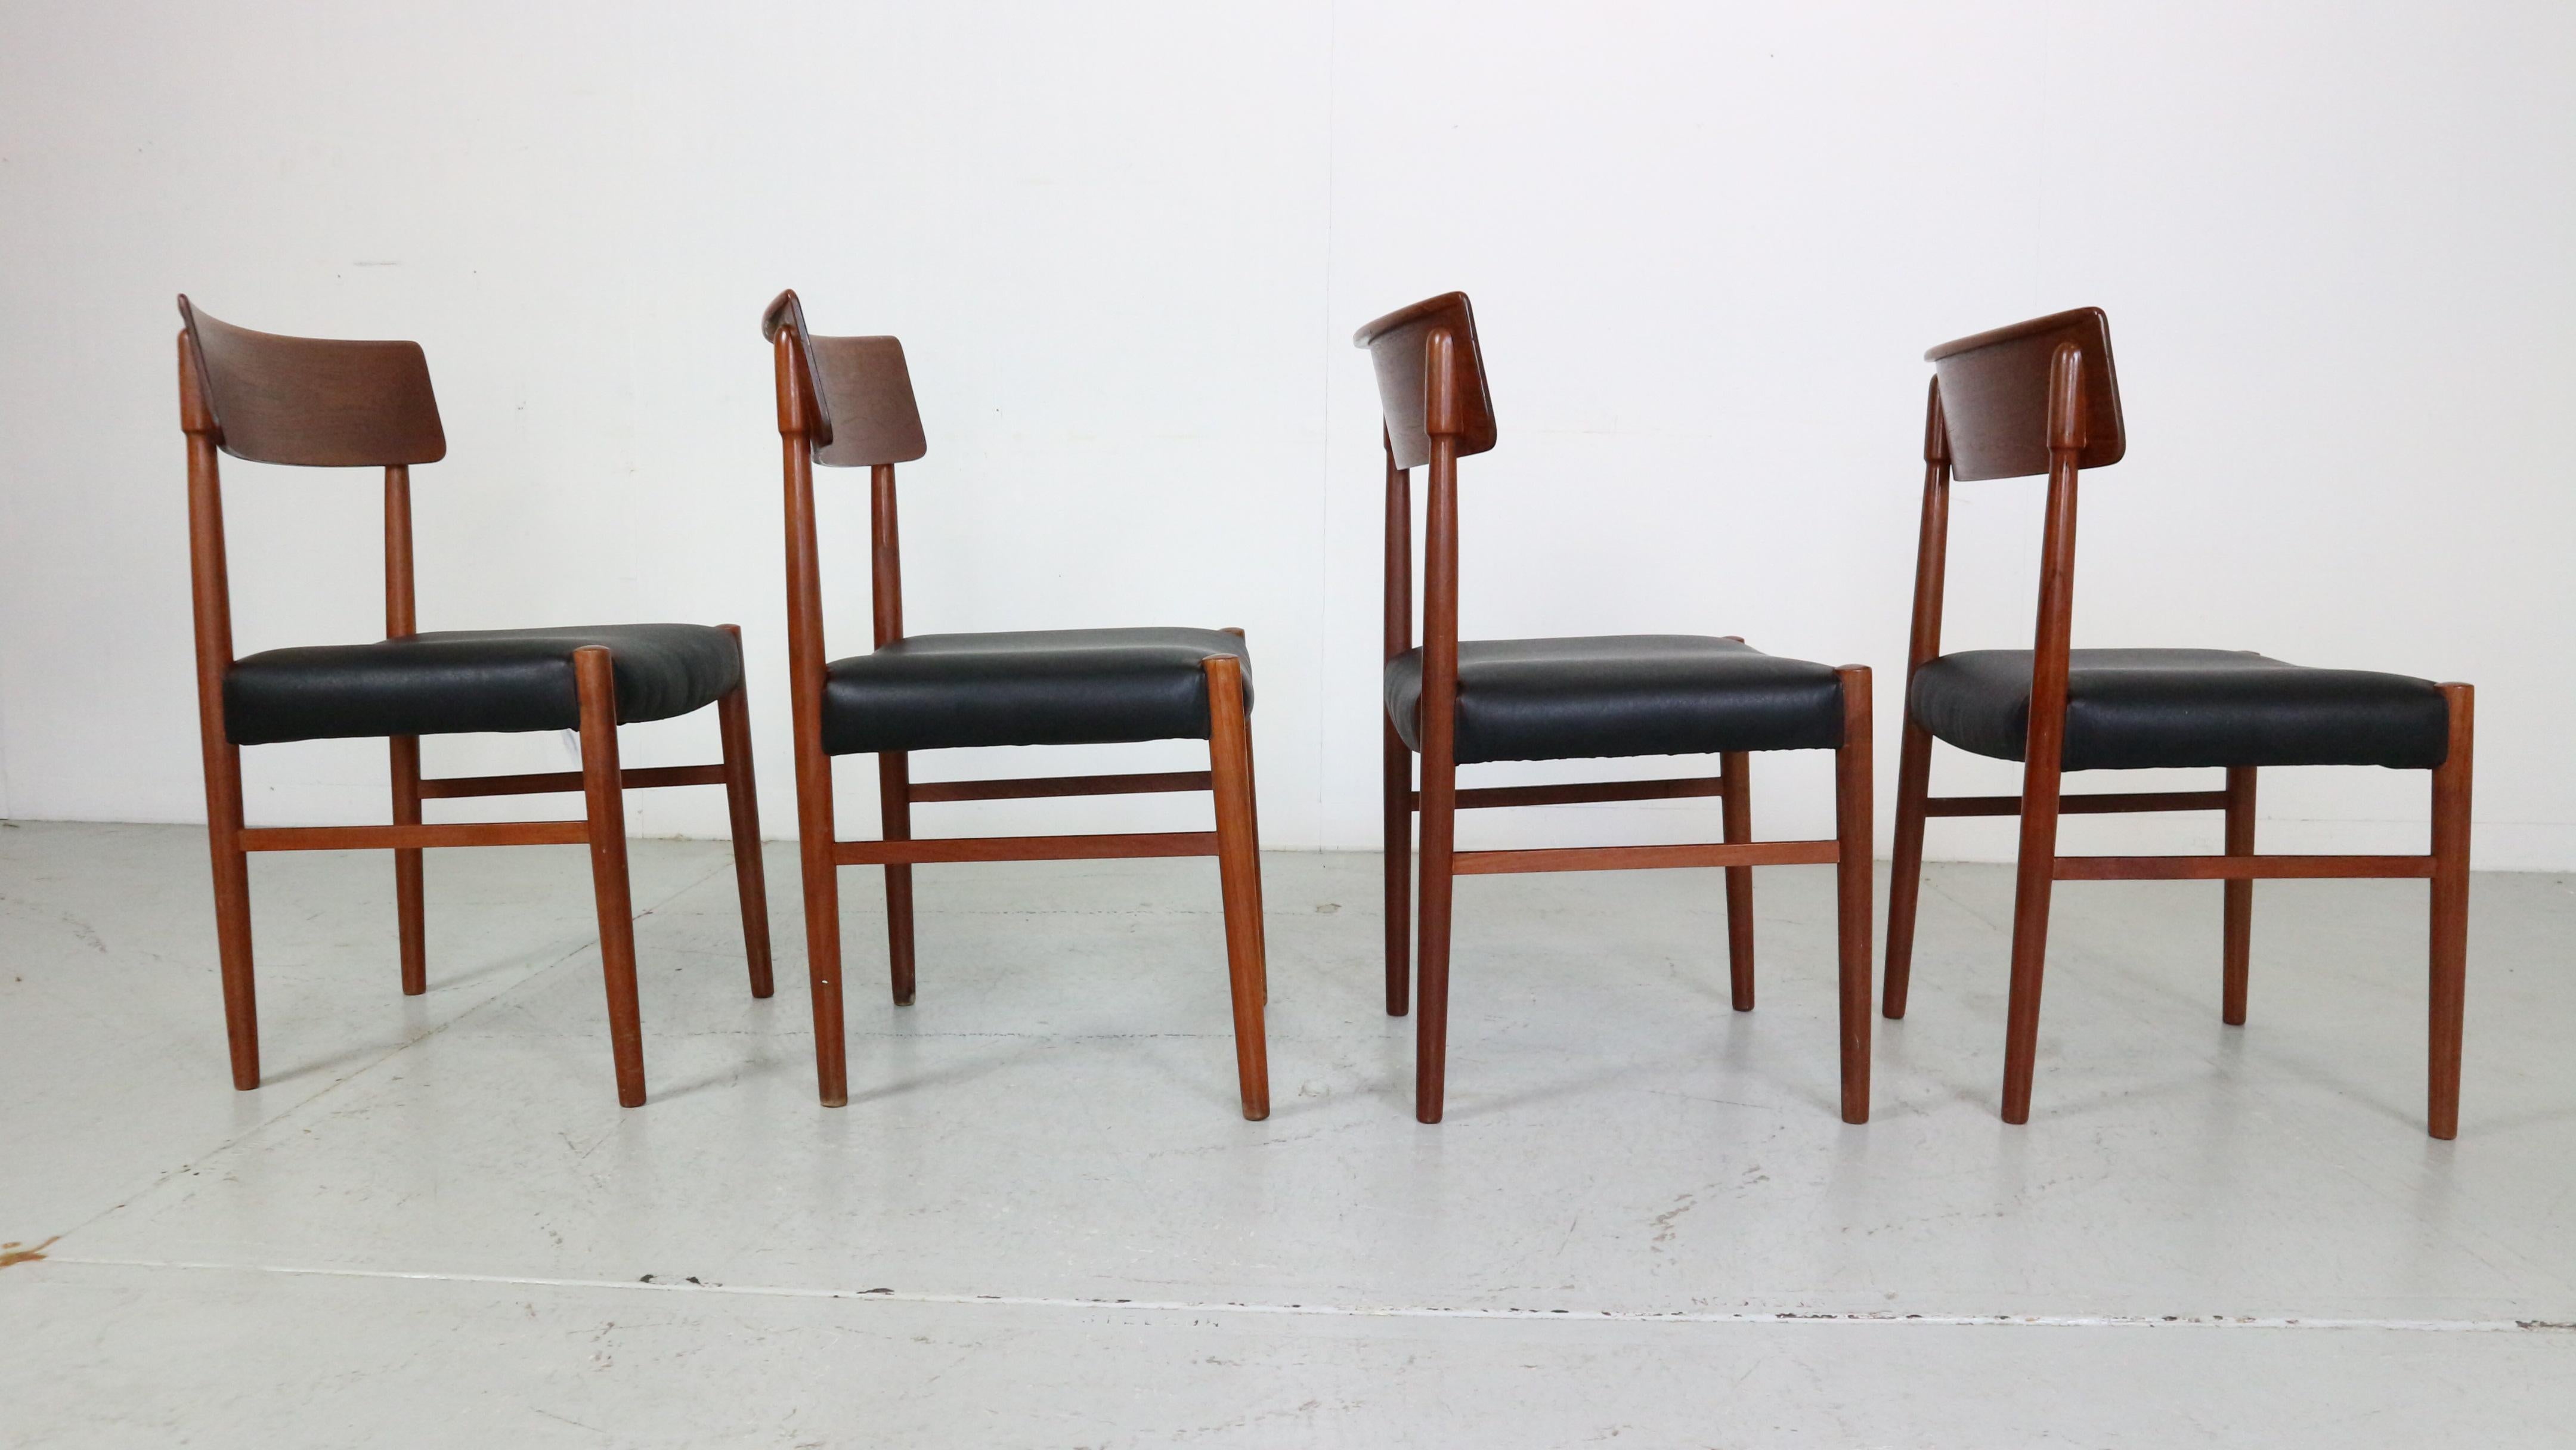 Faux Leather Mid-Century Modern Set of 4 Teak Dinning Room Chairs, 1960 Denmark For Sale